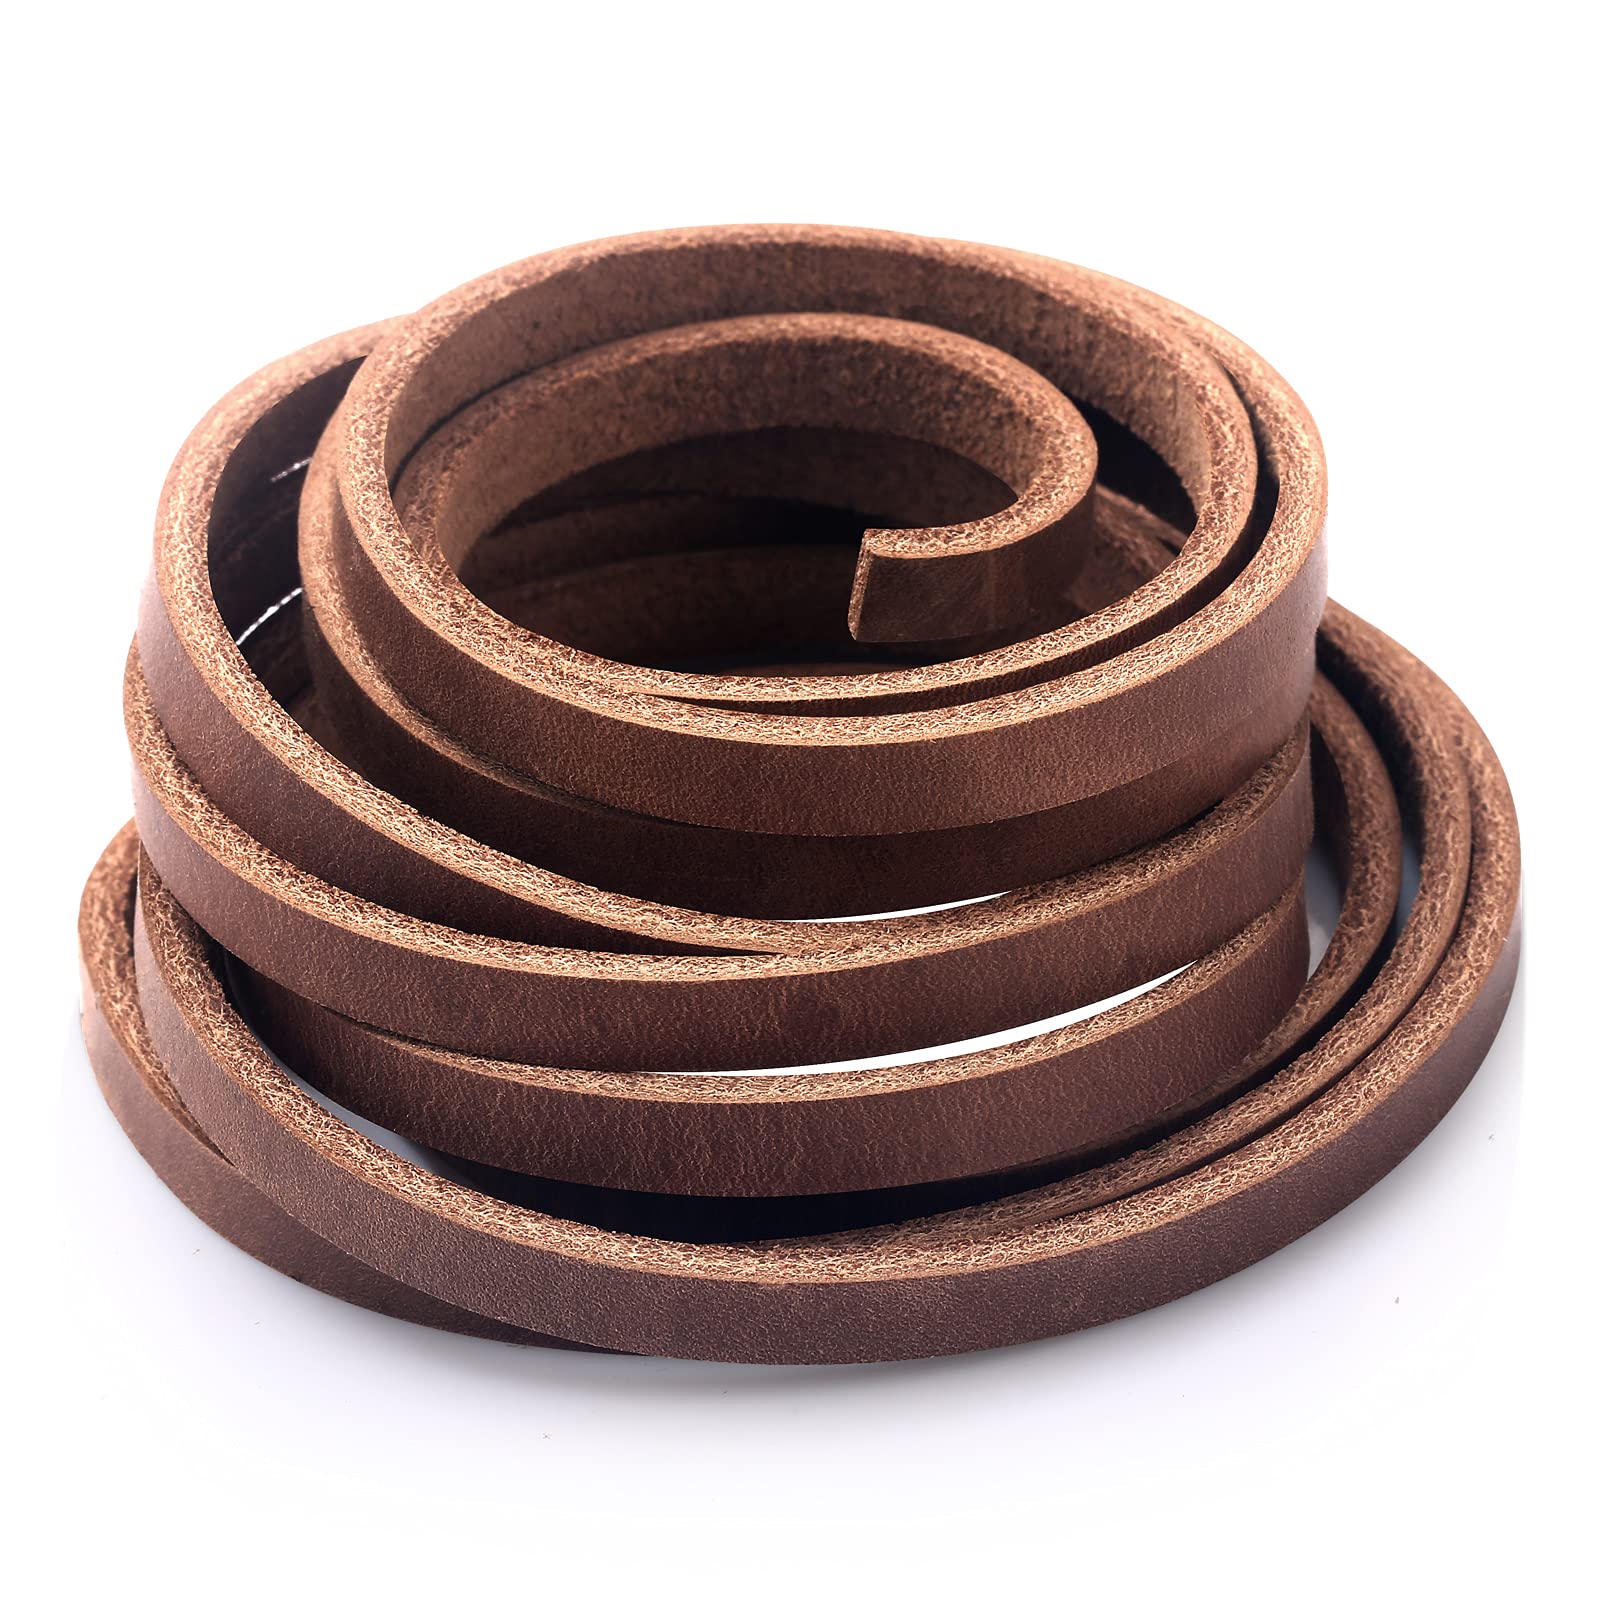 Picheng 3mm Flat Genuine Leather Cord, 5Yards Strip Cord Braiding String  Very Suitable for Jewelry Making, Leather Shoe Lace, Garden  Tools，Toys，Woven